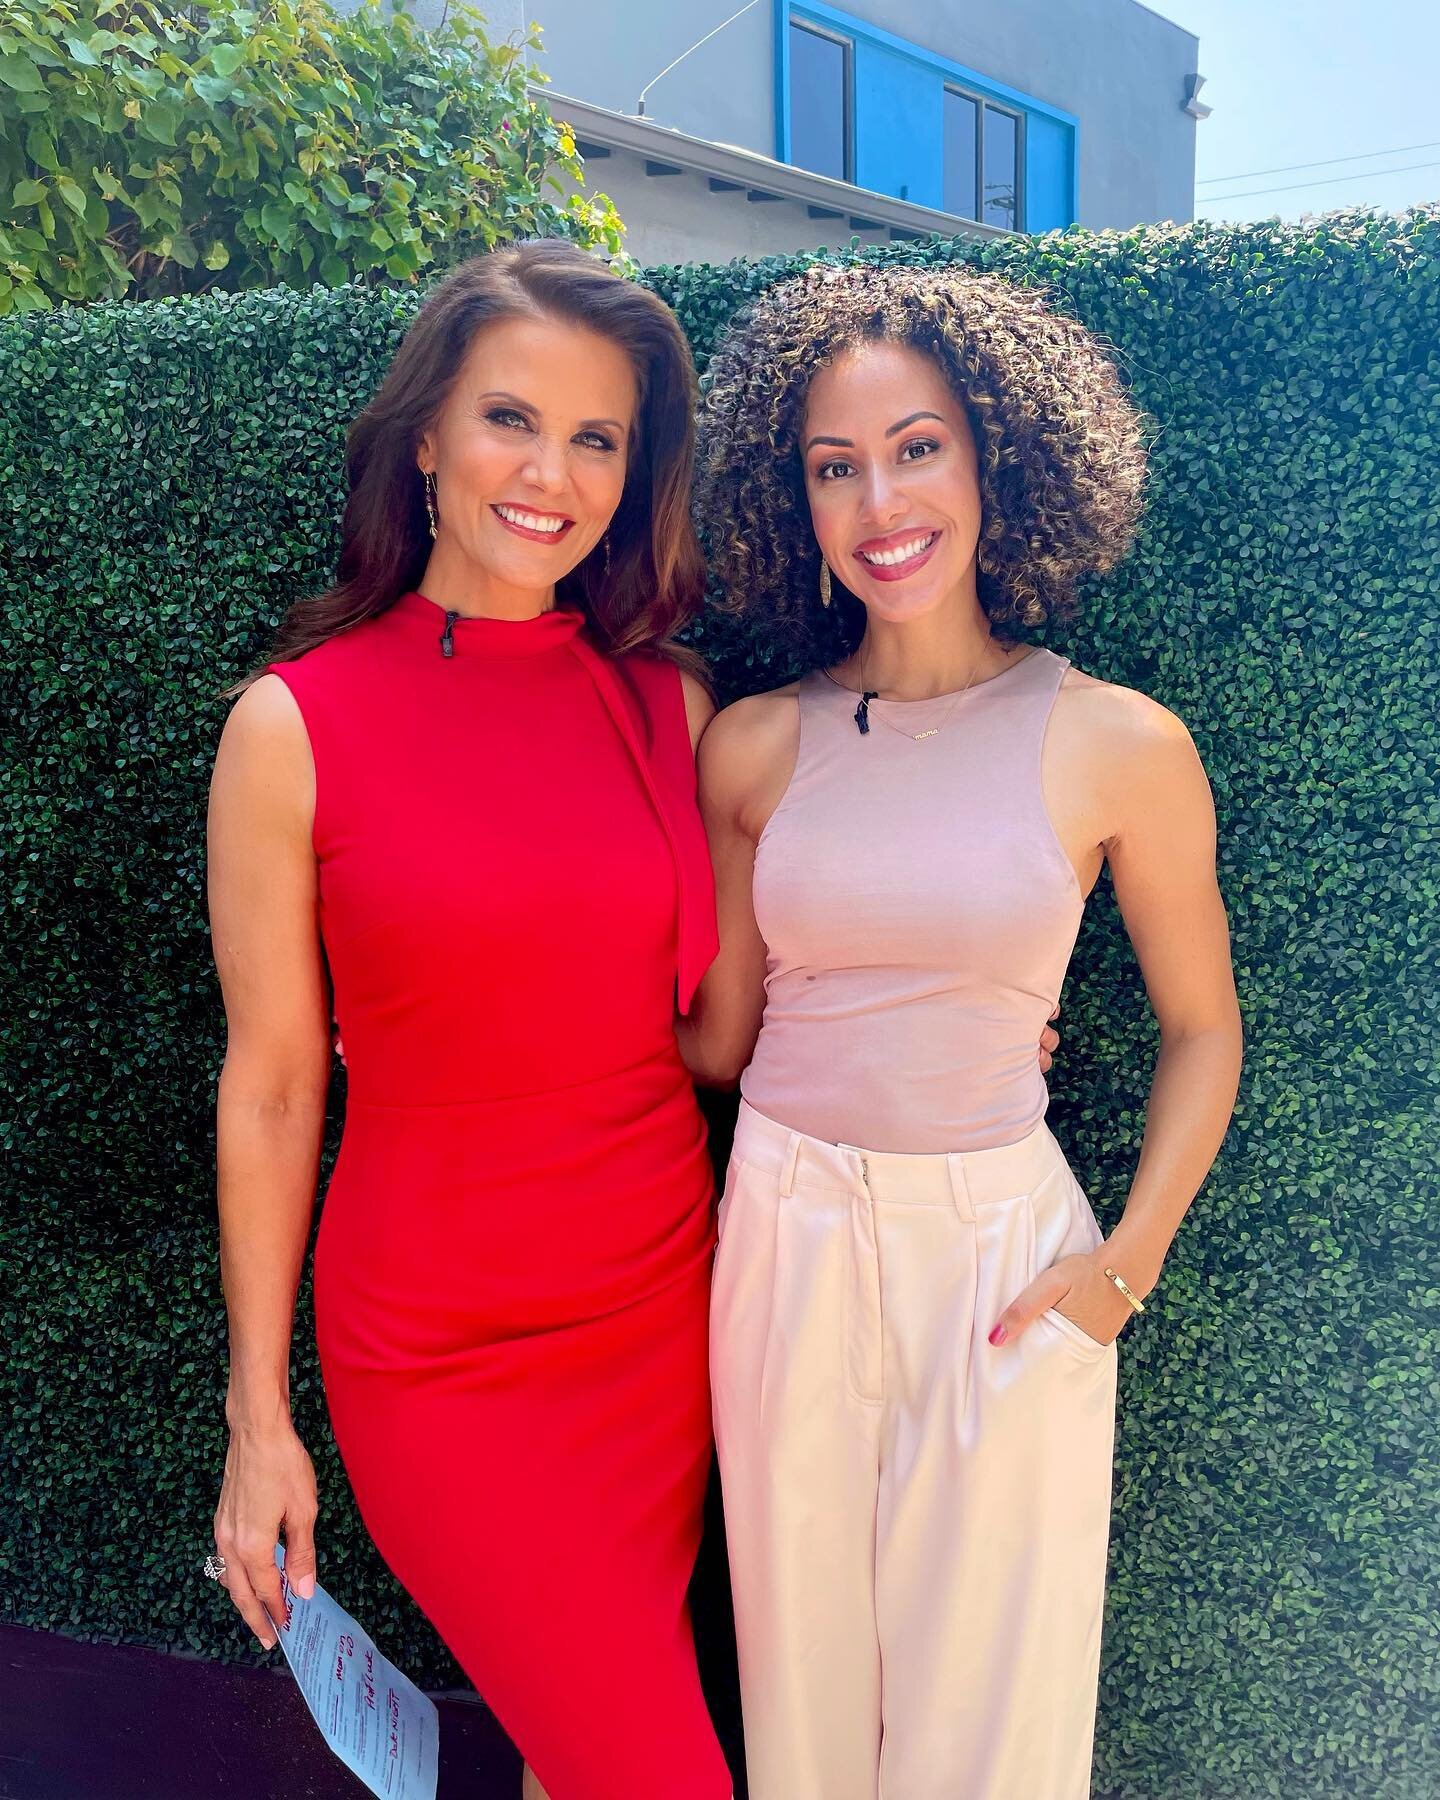 It took me a minute to write this post after last week&rsquo;s segment on @ktla5news because I was so humbled (and star struck) to be working with a legend like @luparkerla ! As I am getting my sea legs in this new industry, I honestly feel that I am